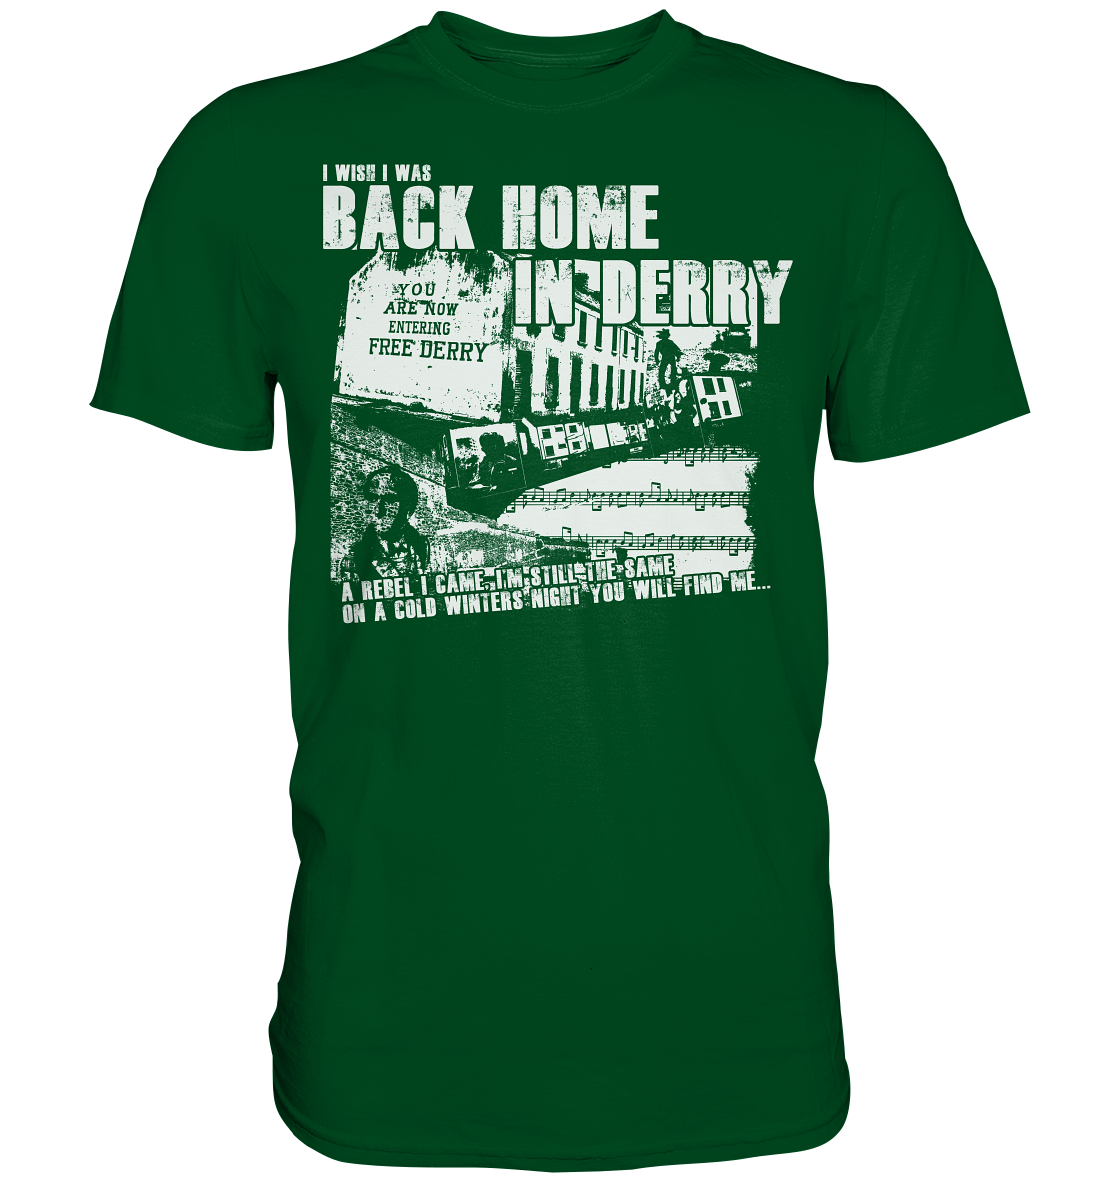 I Wish I Was Back Home In Derry - Premium Shirt